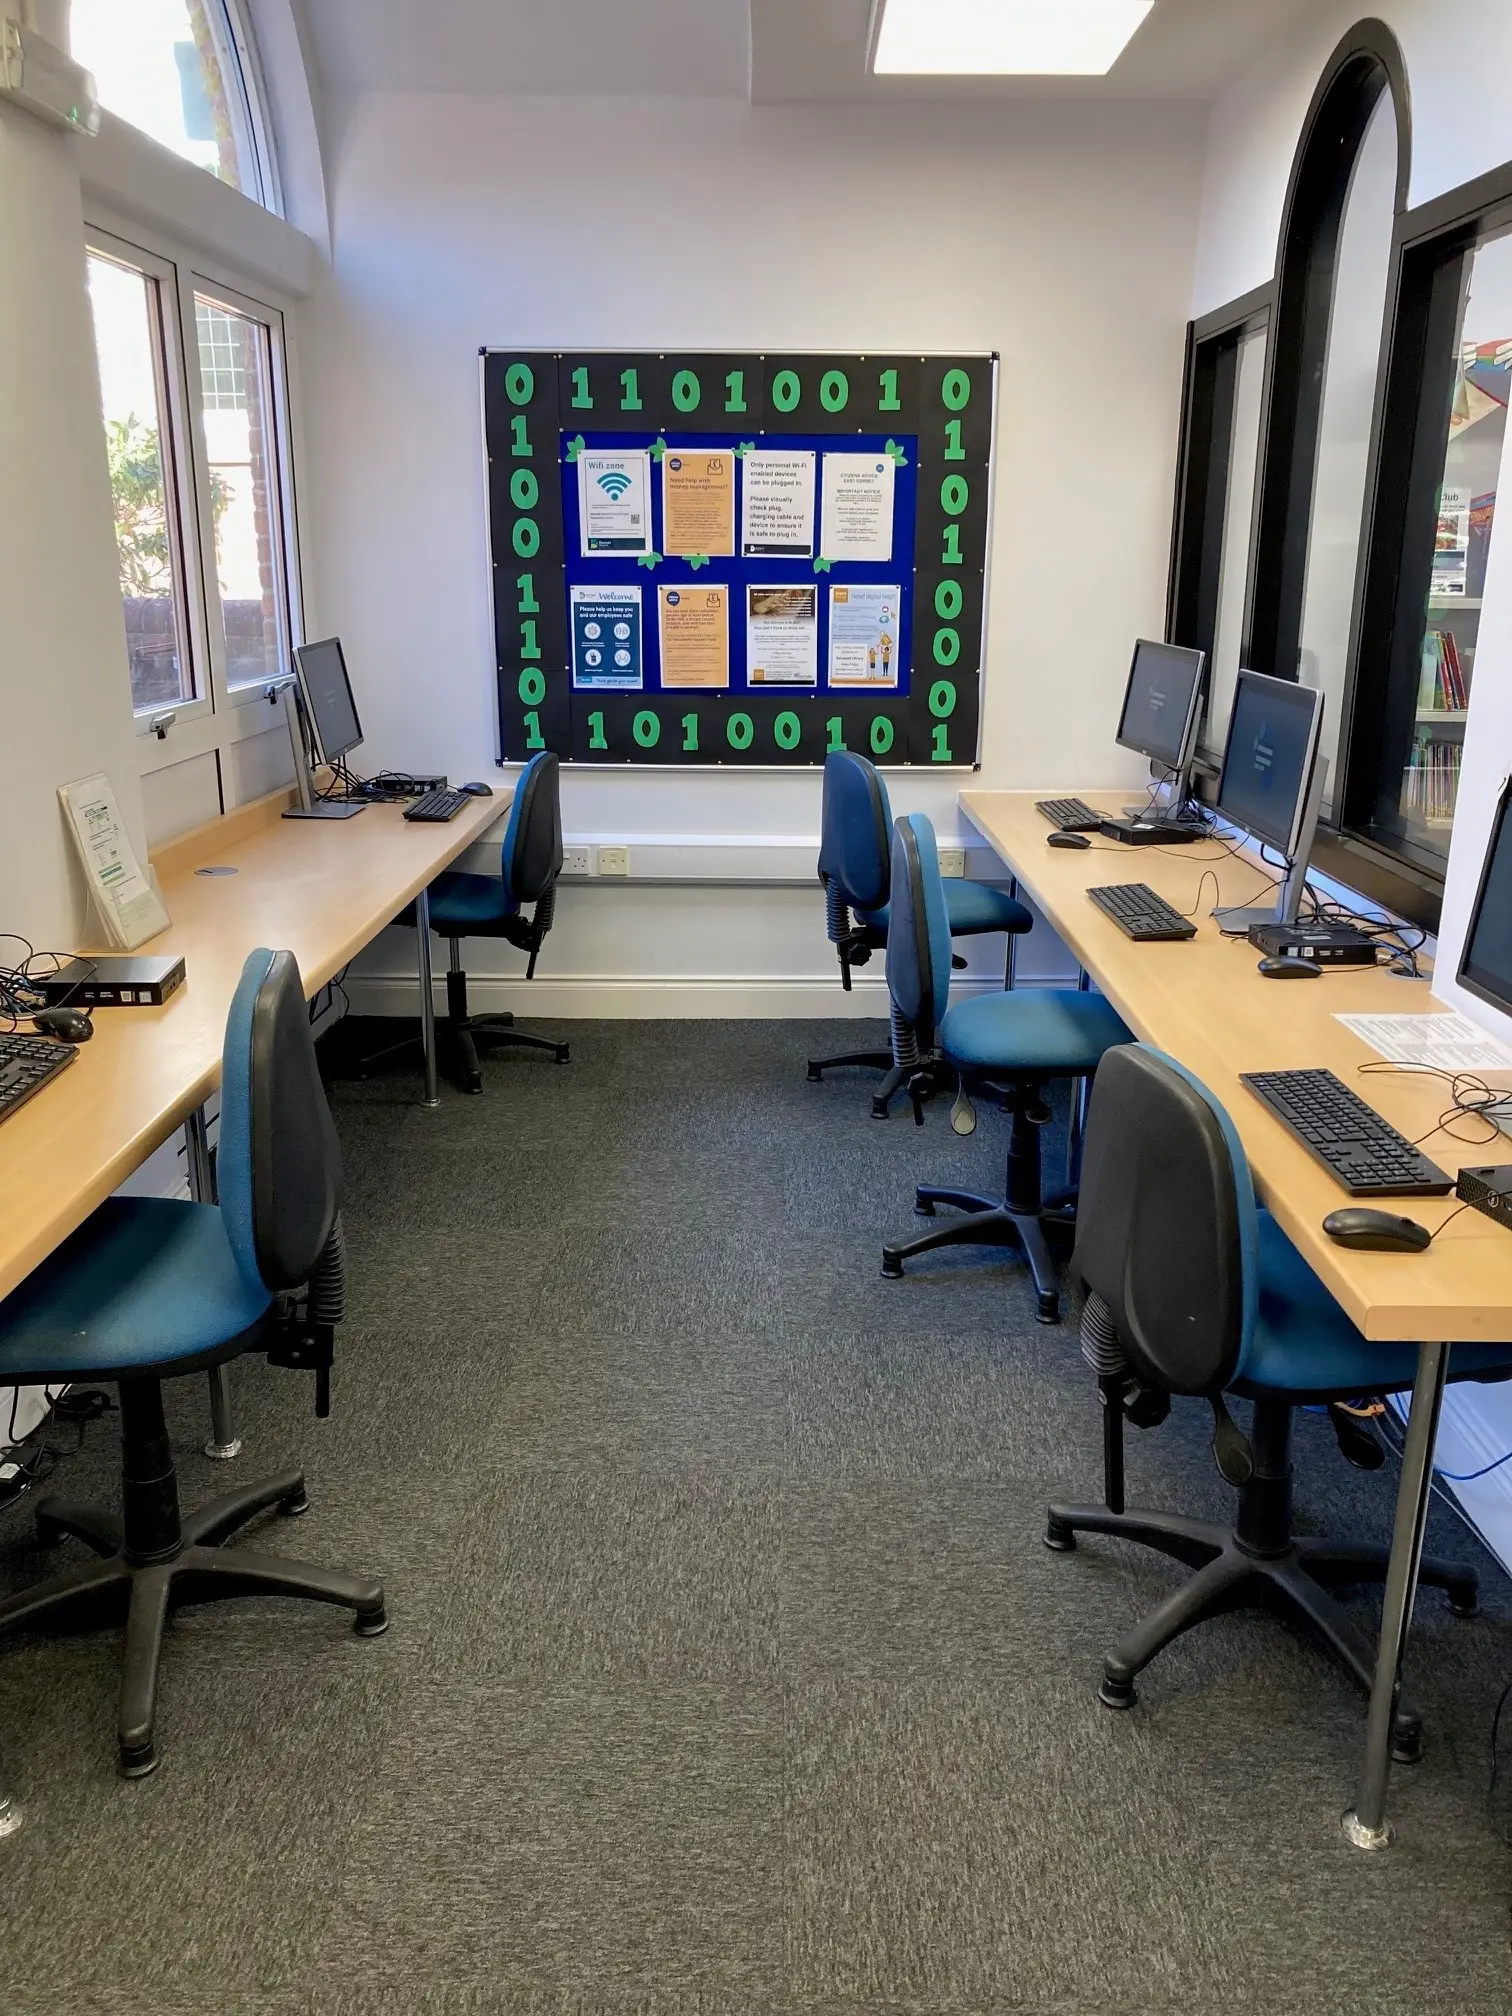 This is a picture of six desks with computer screens and keyboards on the and chairs in front.